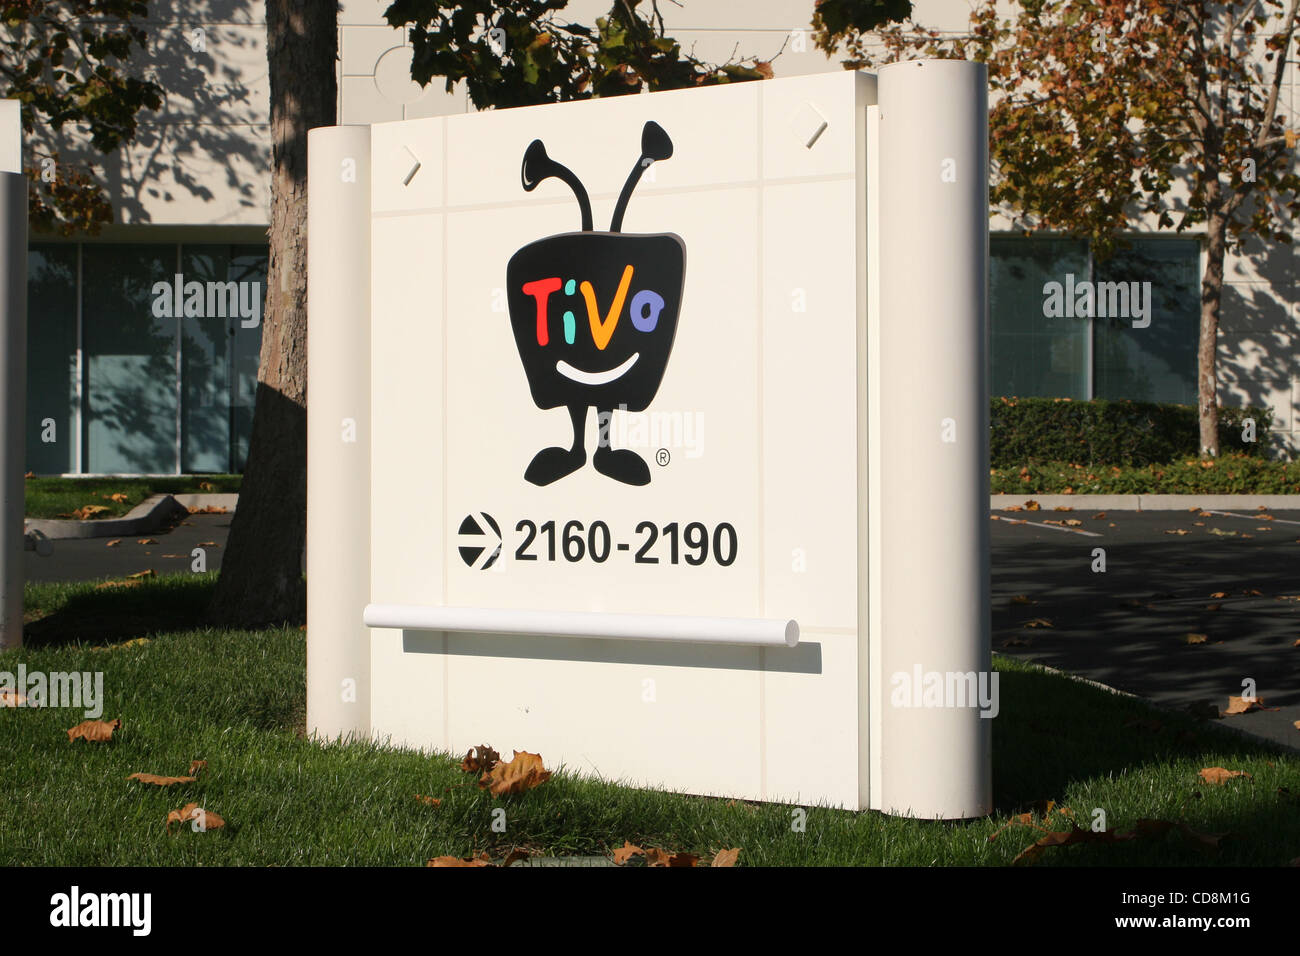 Nov 23, 2008 - Alviso, California, USA - Worldwide headquarters of TiVo Inc. at 2160 Gold Street in Alviso, California, in the heart of Silicon Valley.  Founded in 1997, TiVo, created a new product and service category with the development of the world's first digital video recorder (DVR). Today, th Stock Photo